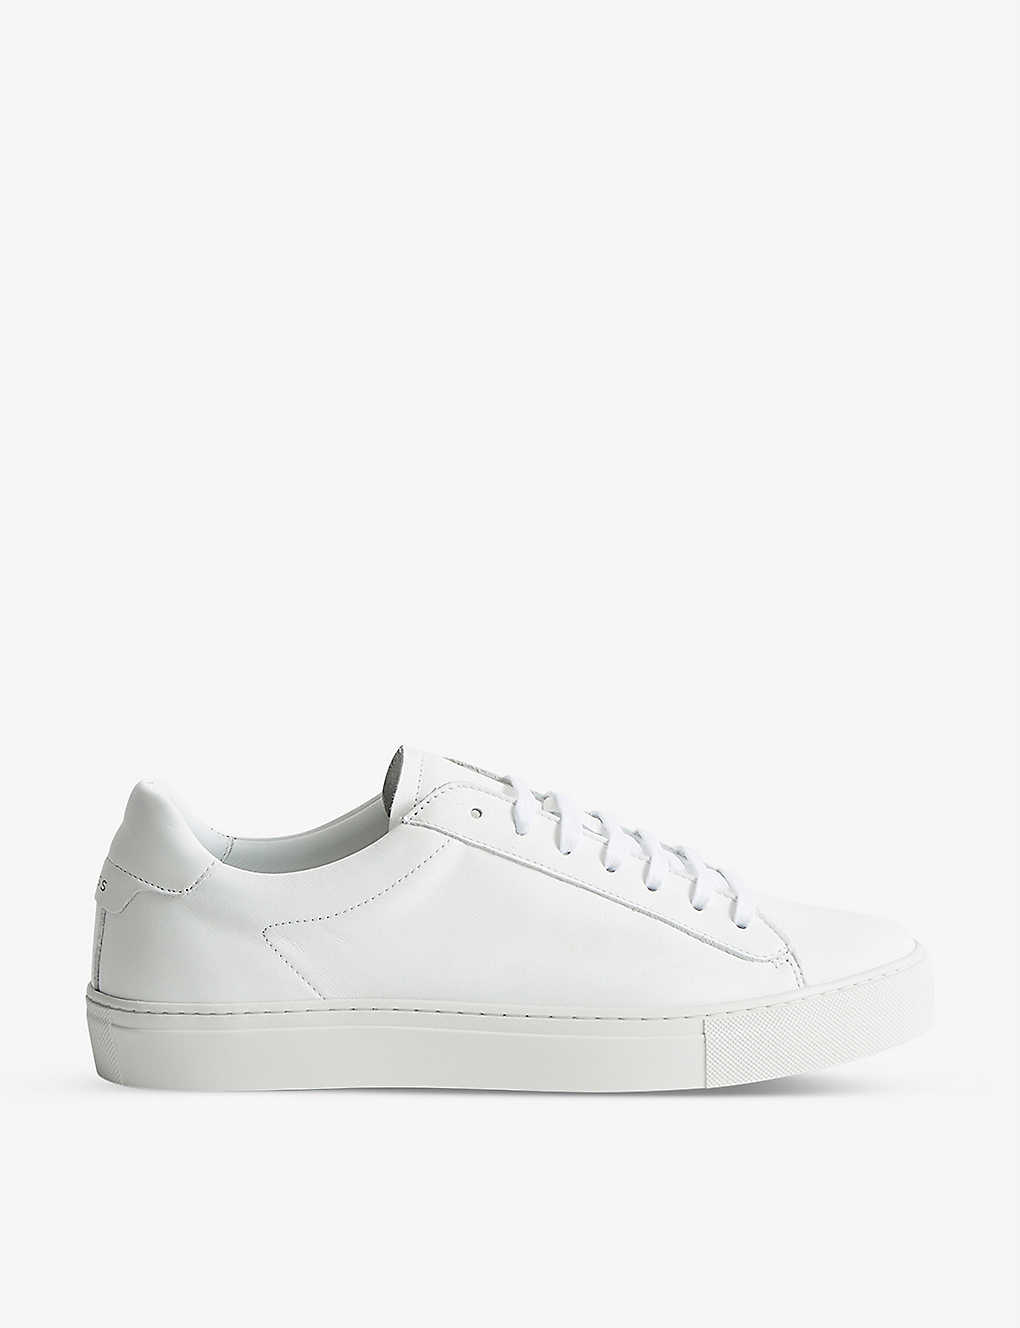 REISS REISS MEN'S WHITE FINLEY LEATHER LOW-TOP TRAINERS,54575005